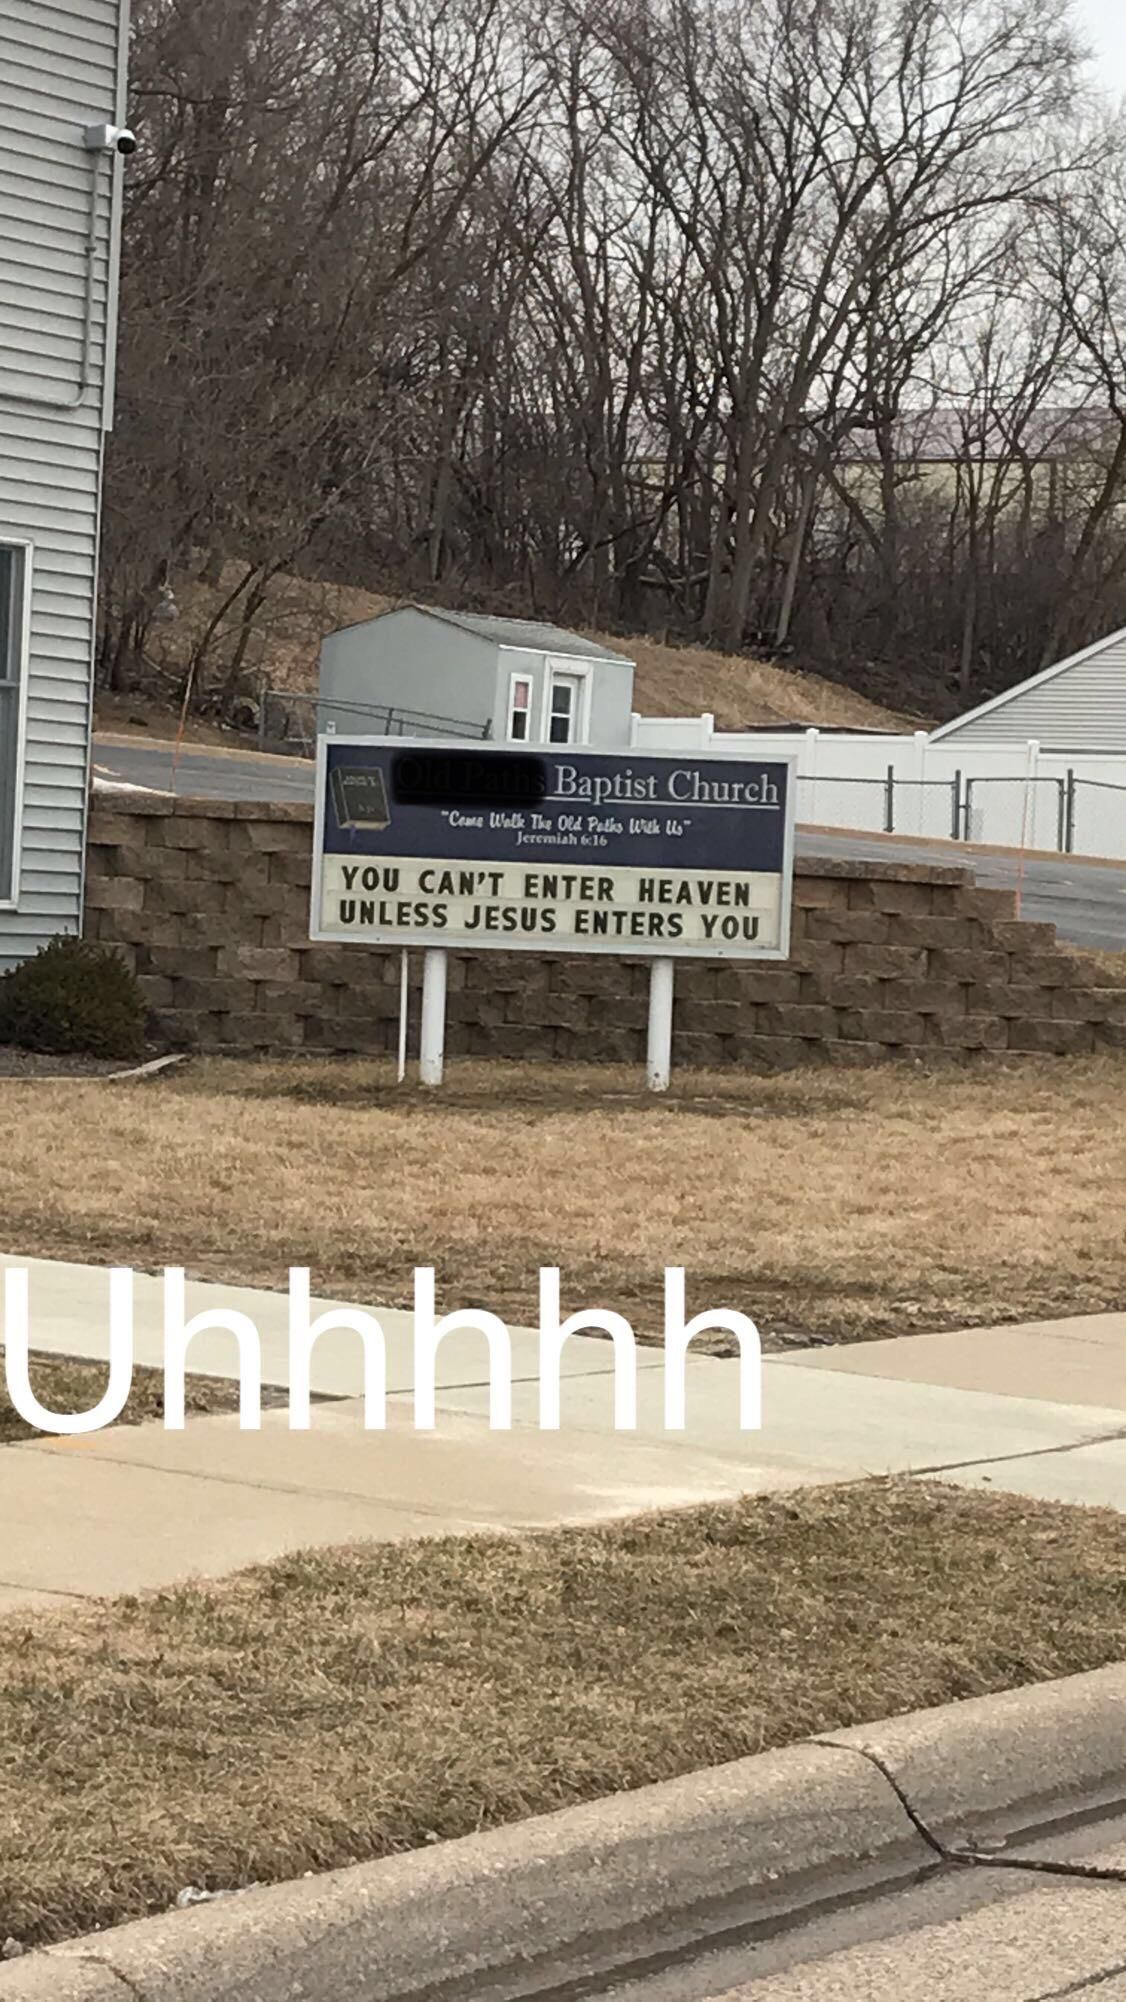 Local church with a questionable sign message.........